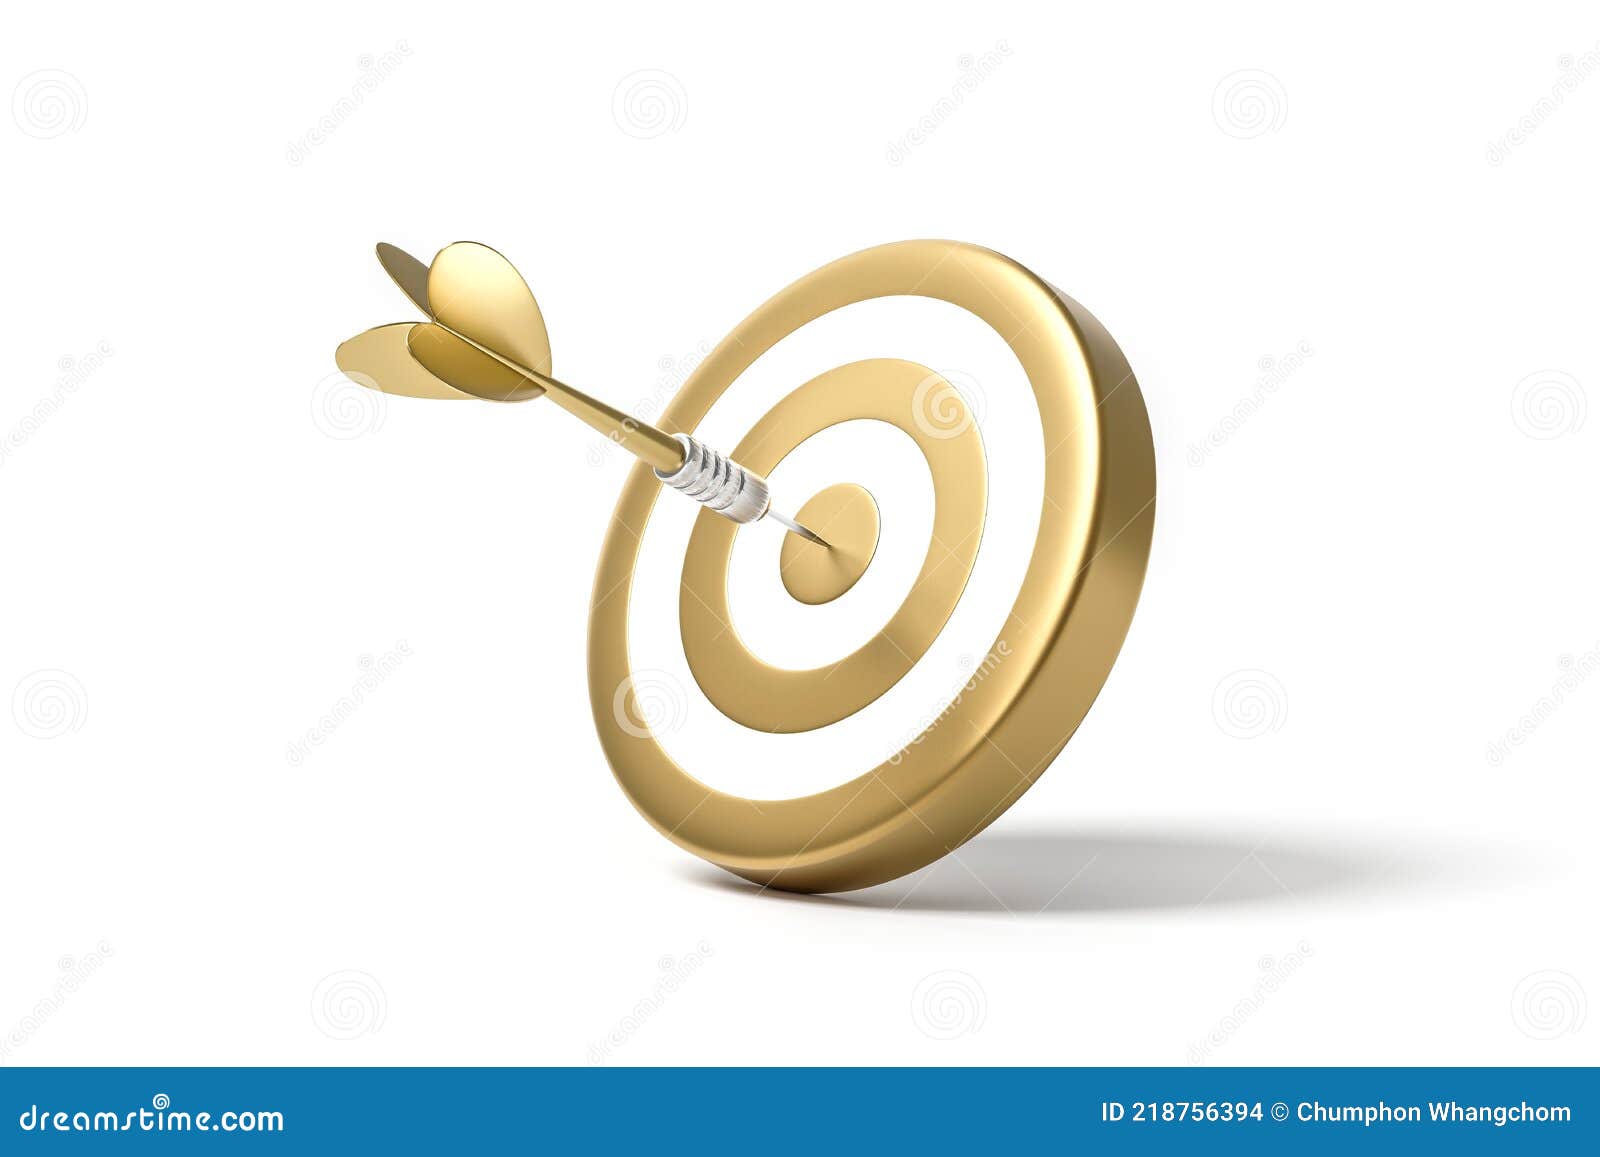 Golden Arrow Aim To Dartboard Target or Goal of Success Isolated on White  Background with Complete Achievement Concept. 3D Stock Illustration -  Illustration of creative, accuracy: 218756394